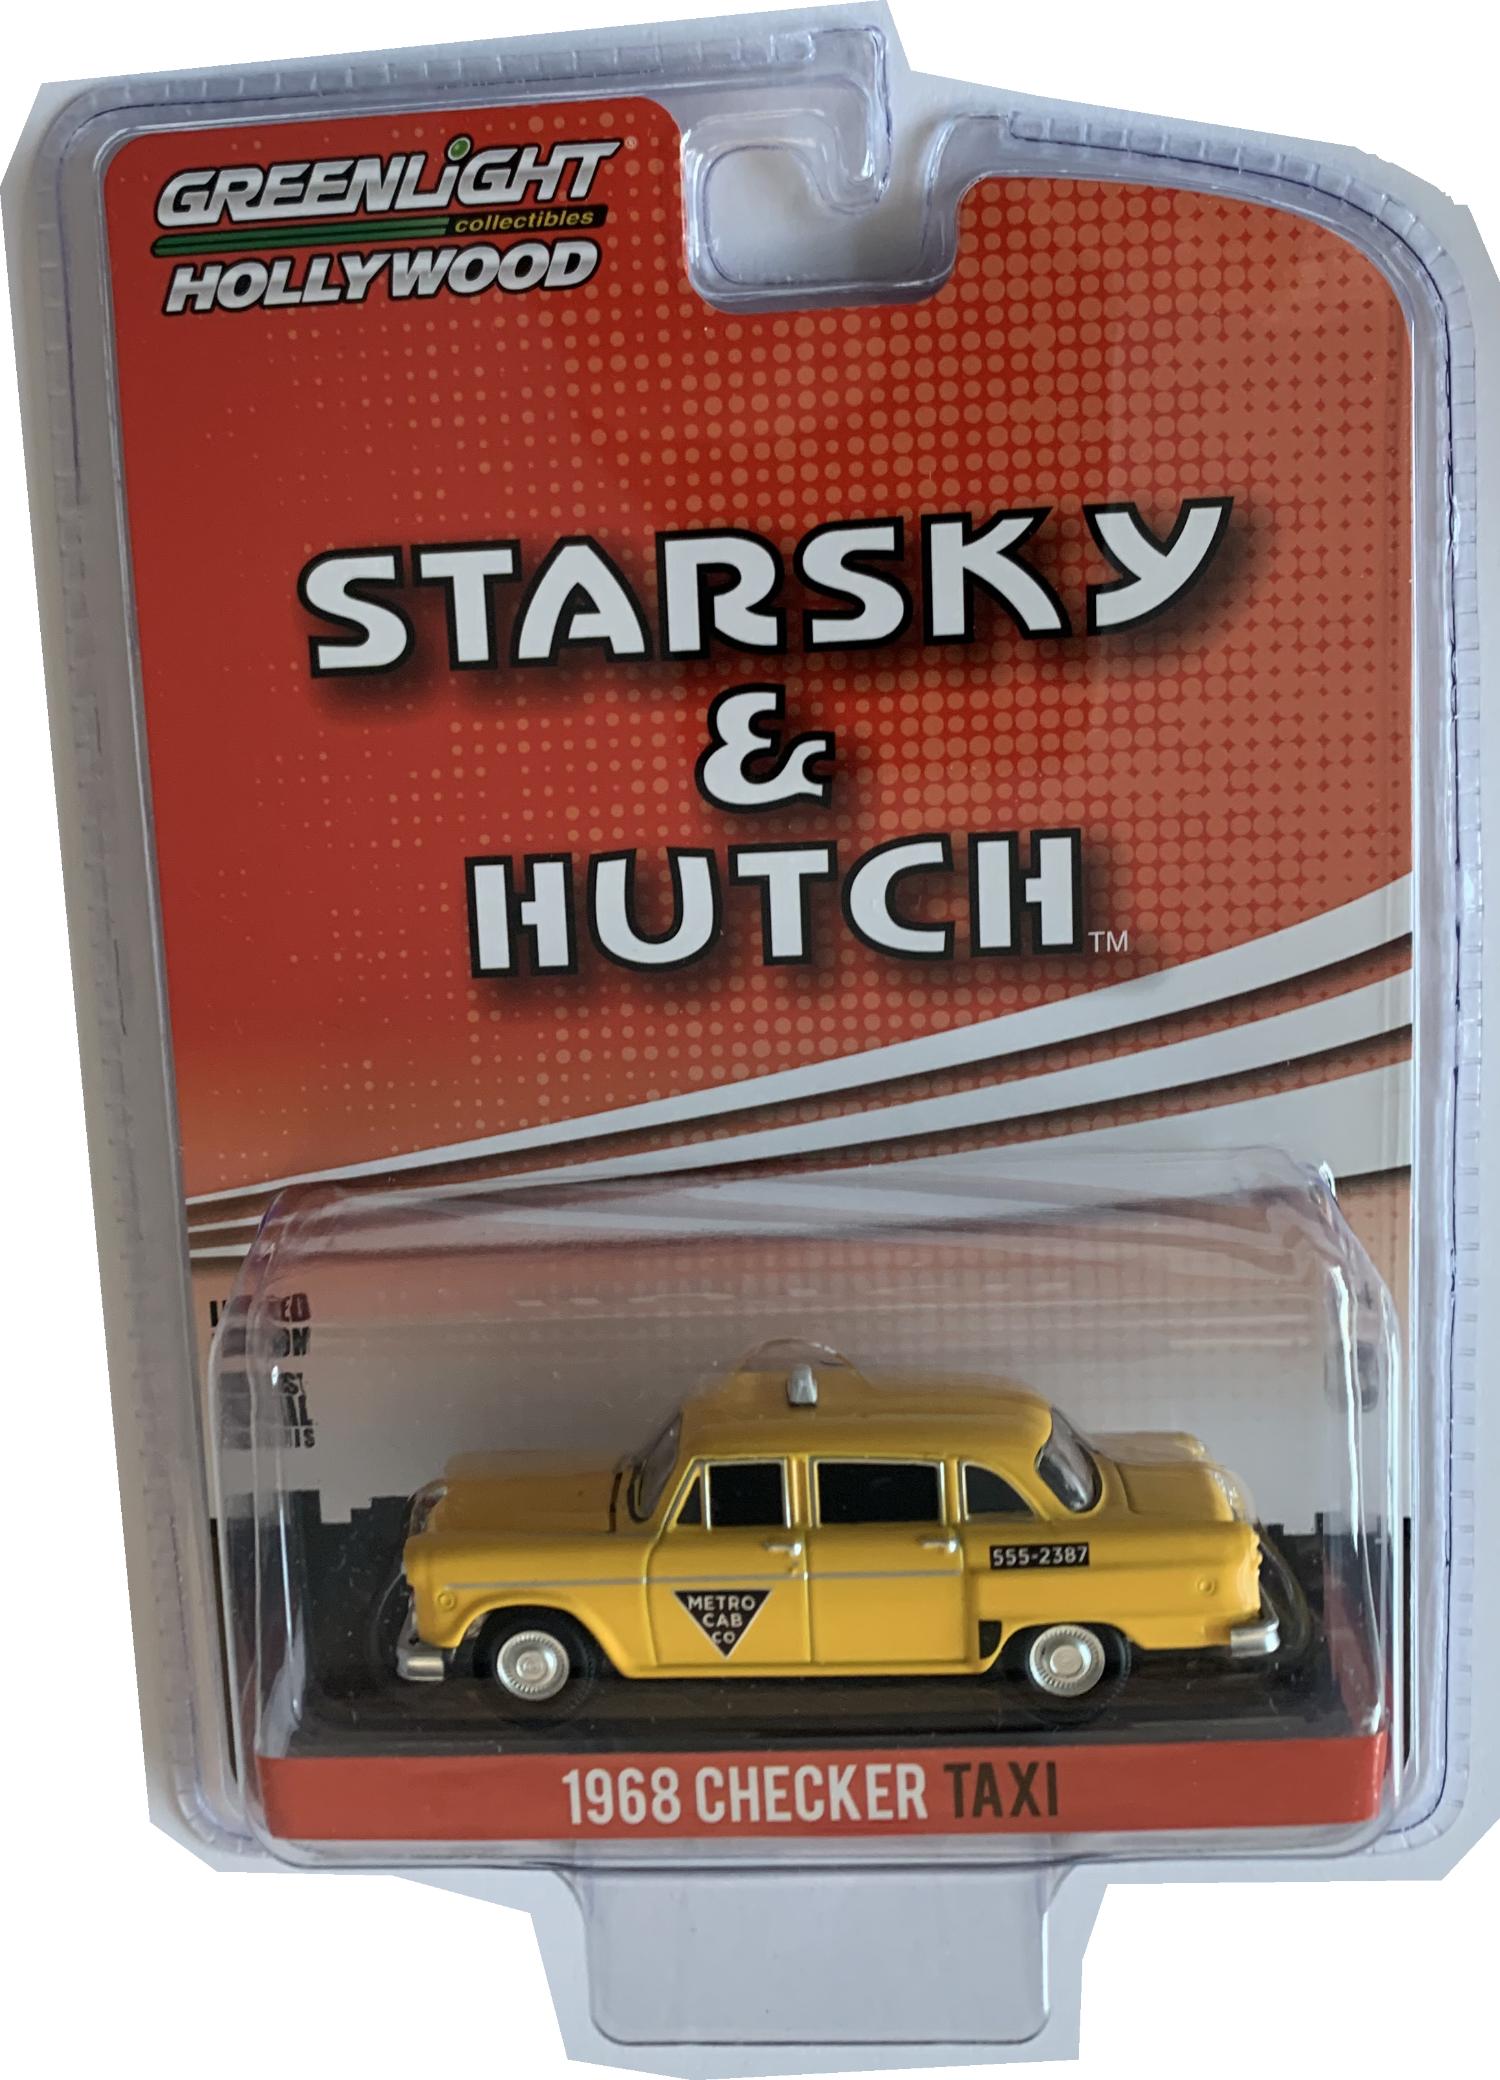 A good replica of the Checker Taxi from the classic television series Starsky & Hutch decorated in yellow with authentic graphics